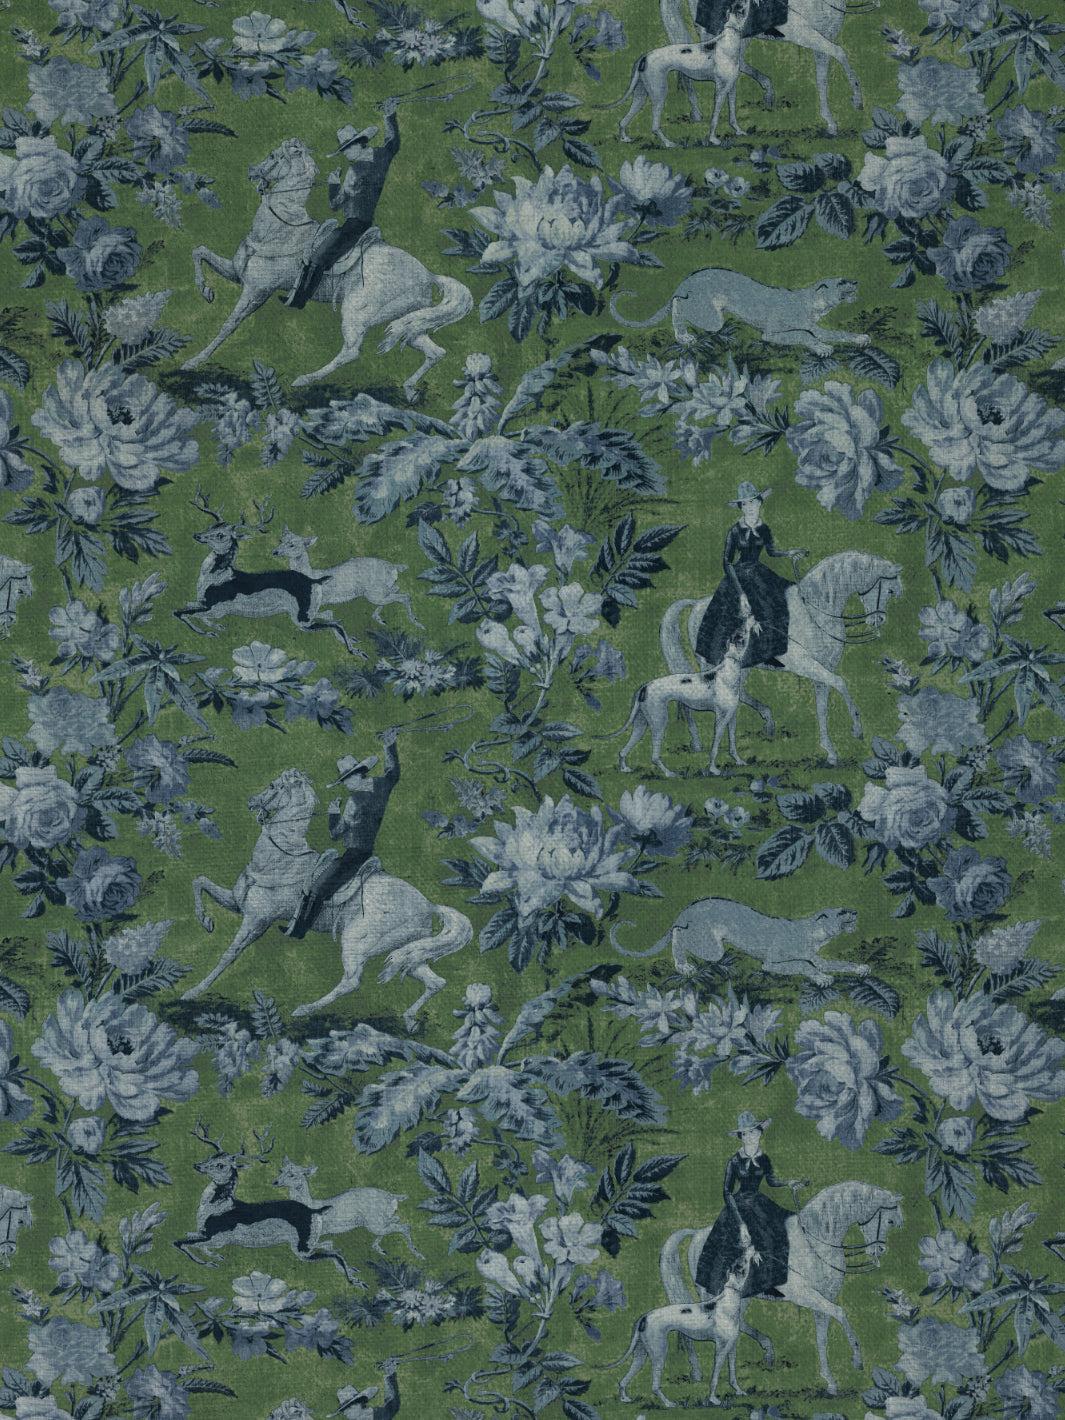 'Cowboy Toile' Linen Fabric by Nathan Turner - Green Blue